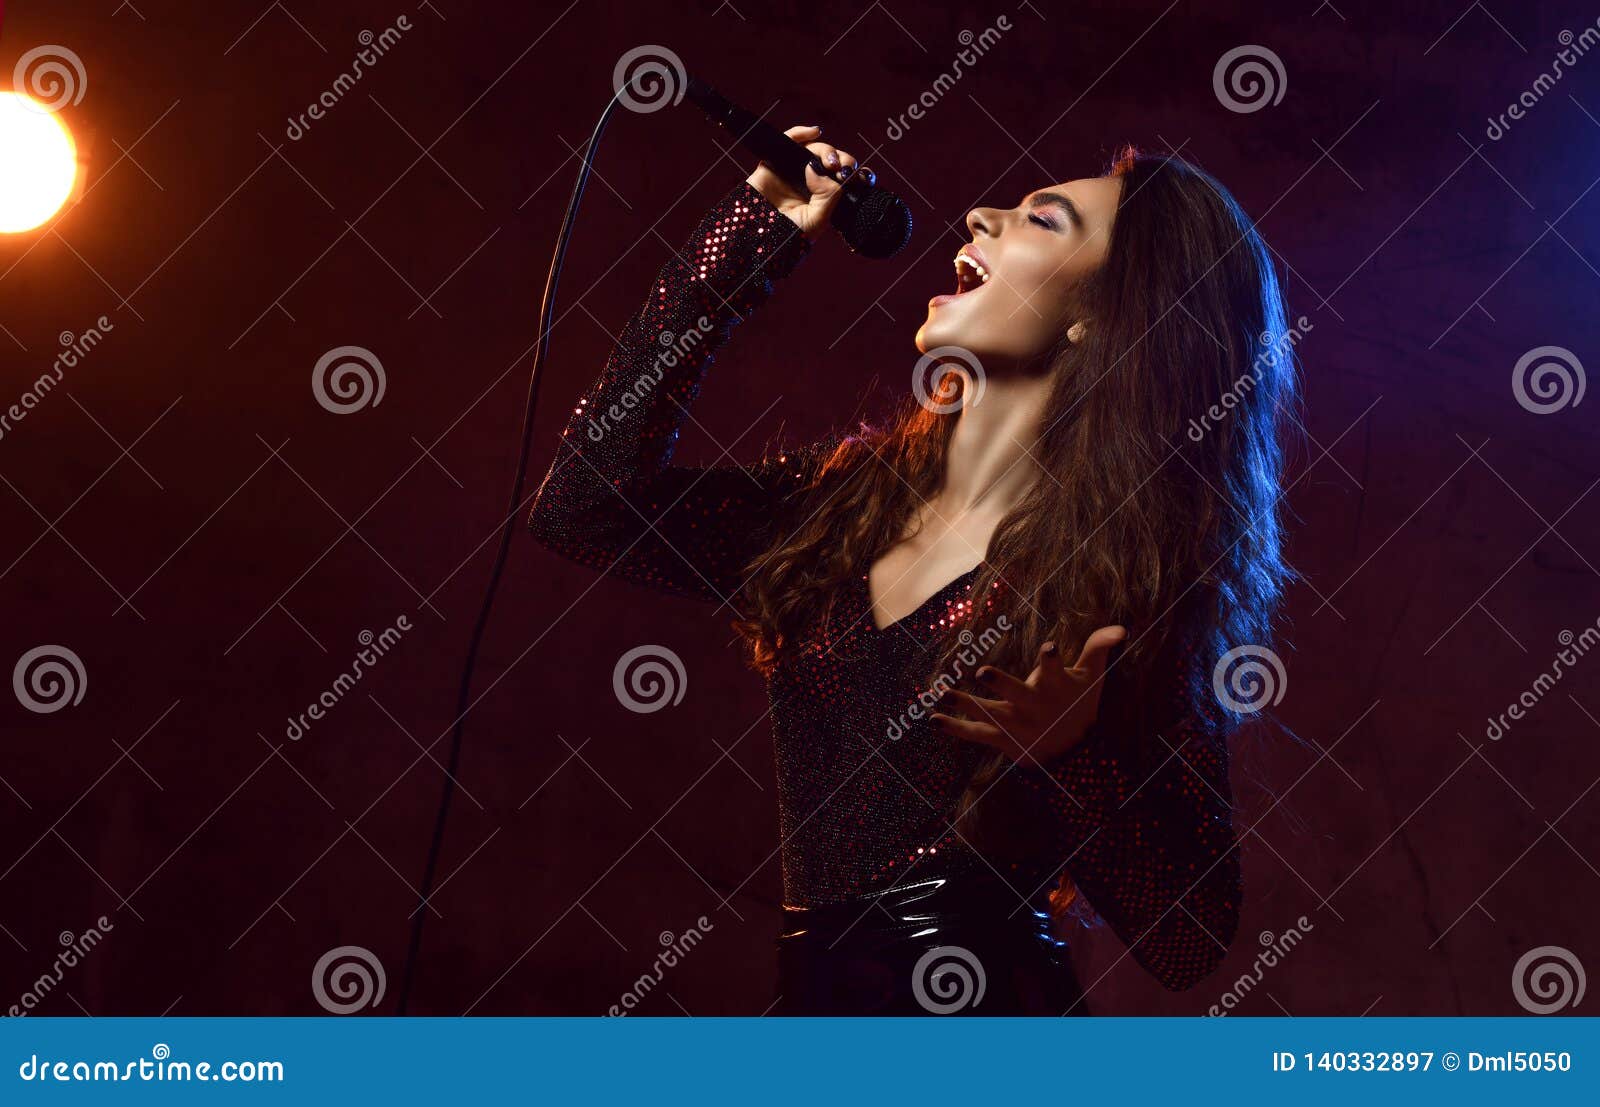 beautiful singing girl curly afro hair. beauty woman singer sing with microphone karaoke song on stage smoke, spotlights